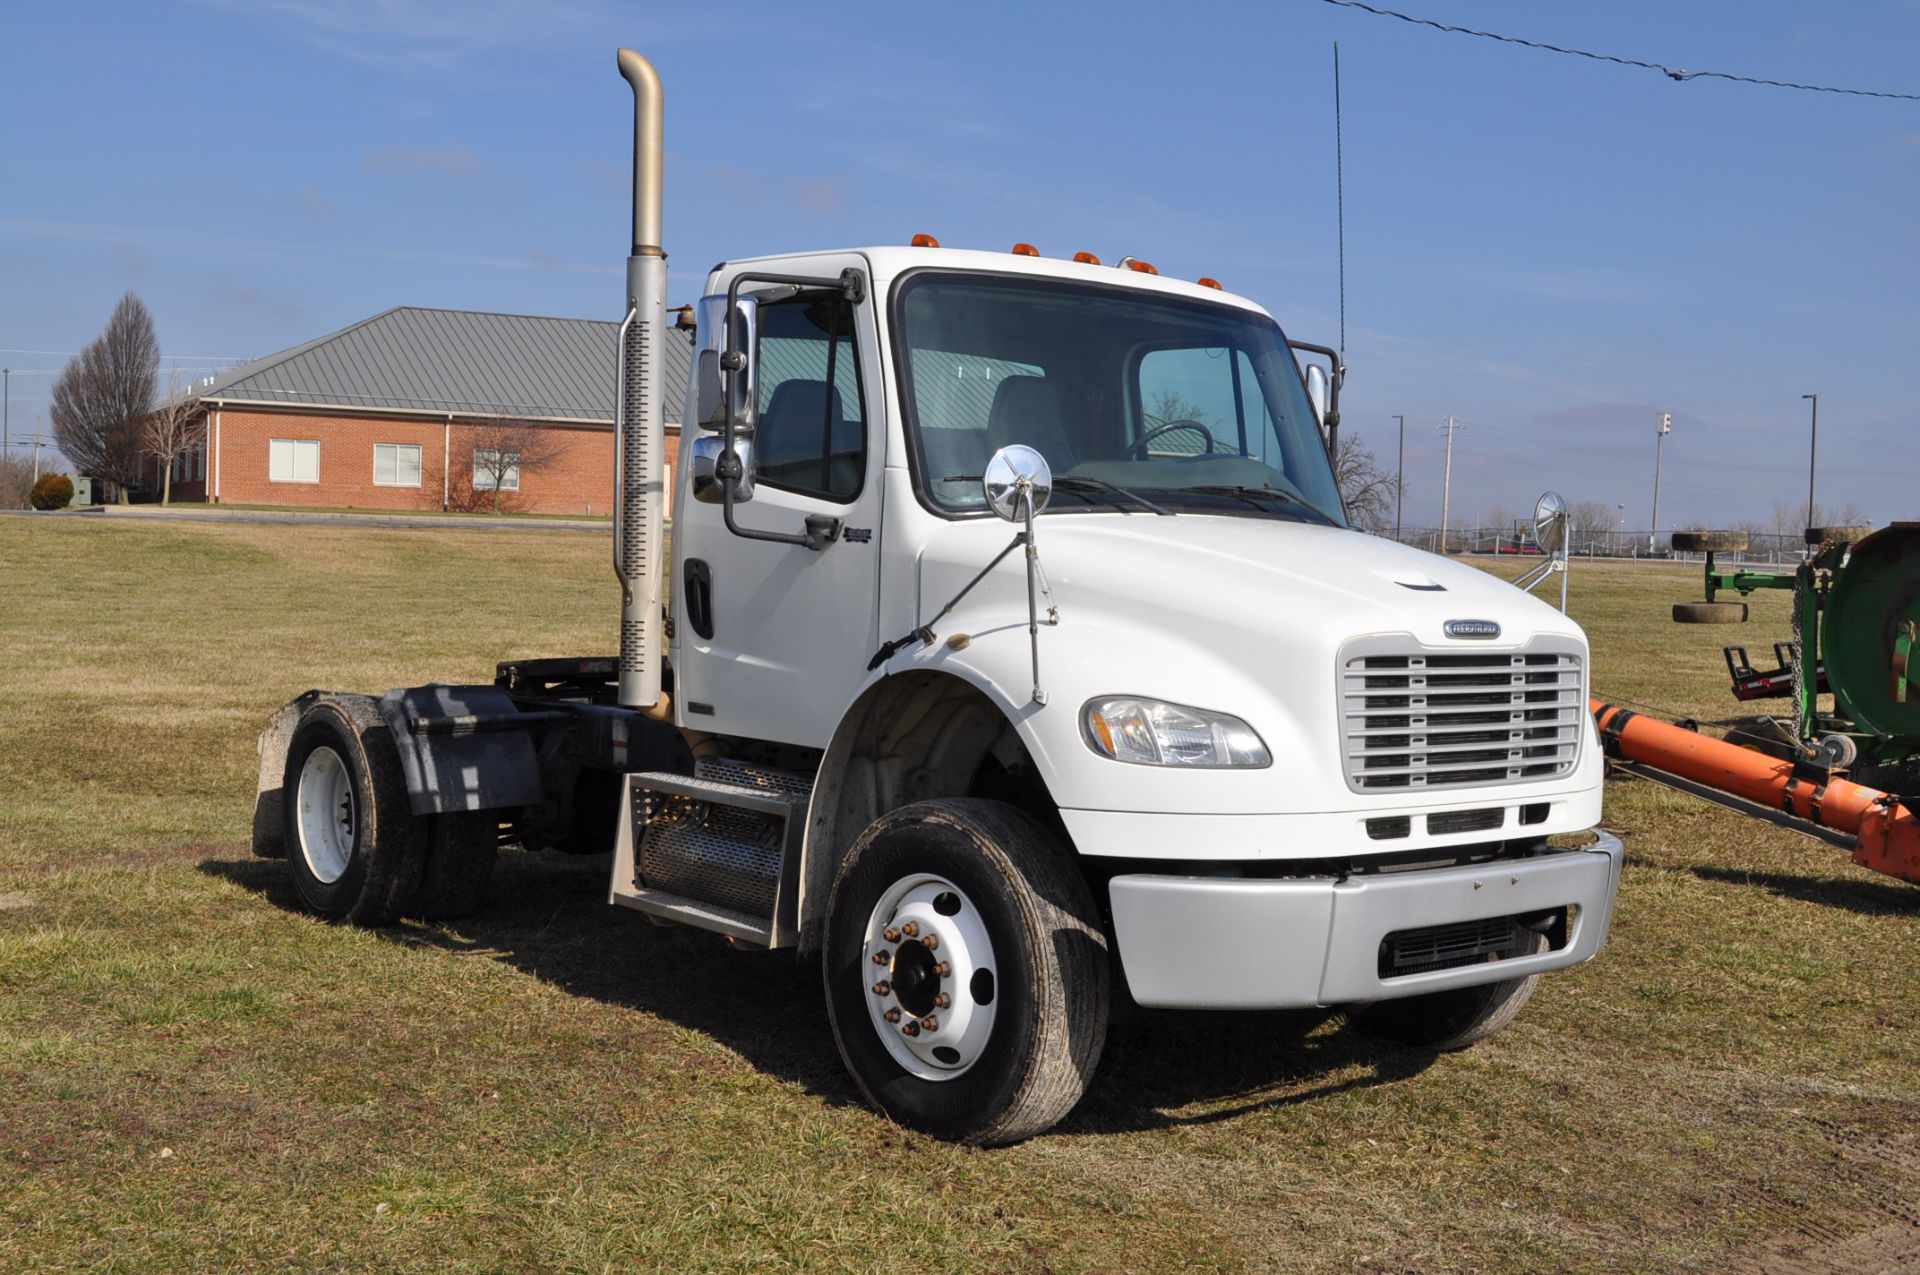 2009 Freightliner M2 semi truck, single axle, day cab, Cummins ISC 260, Allison auto, air ride - Image 2 of 23